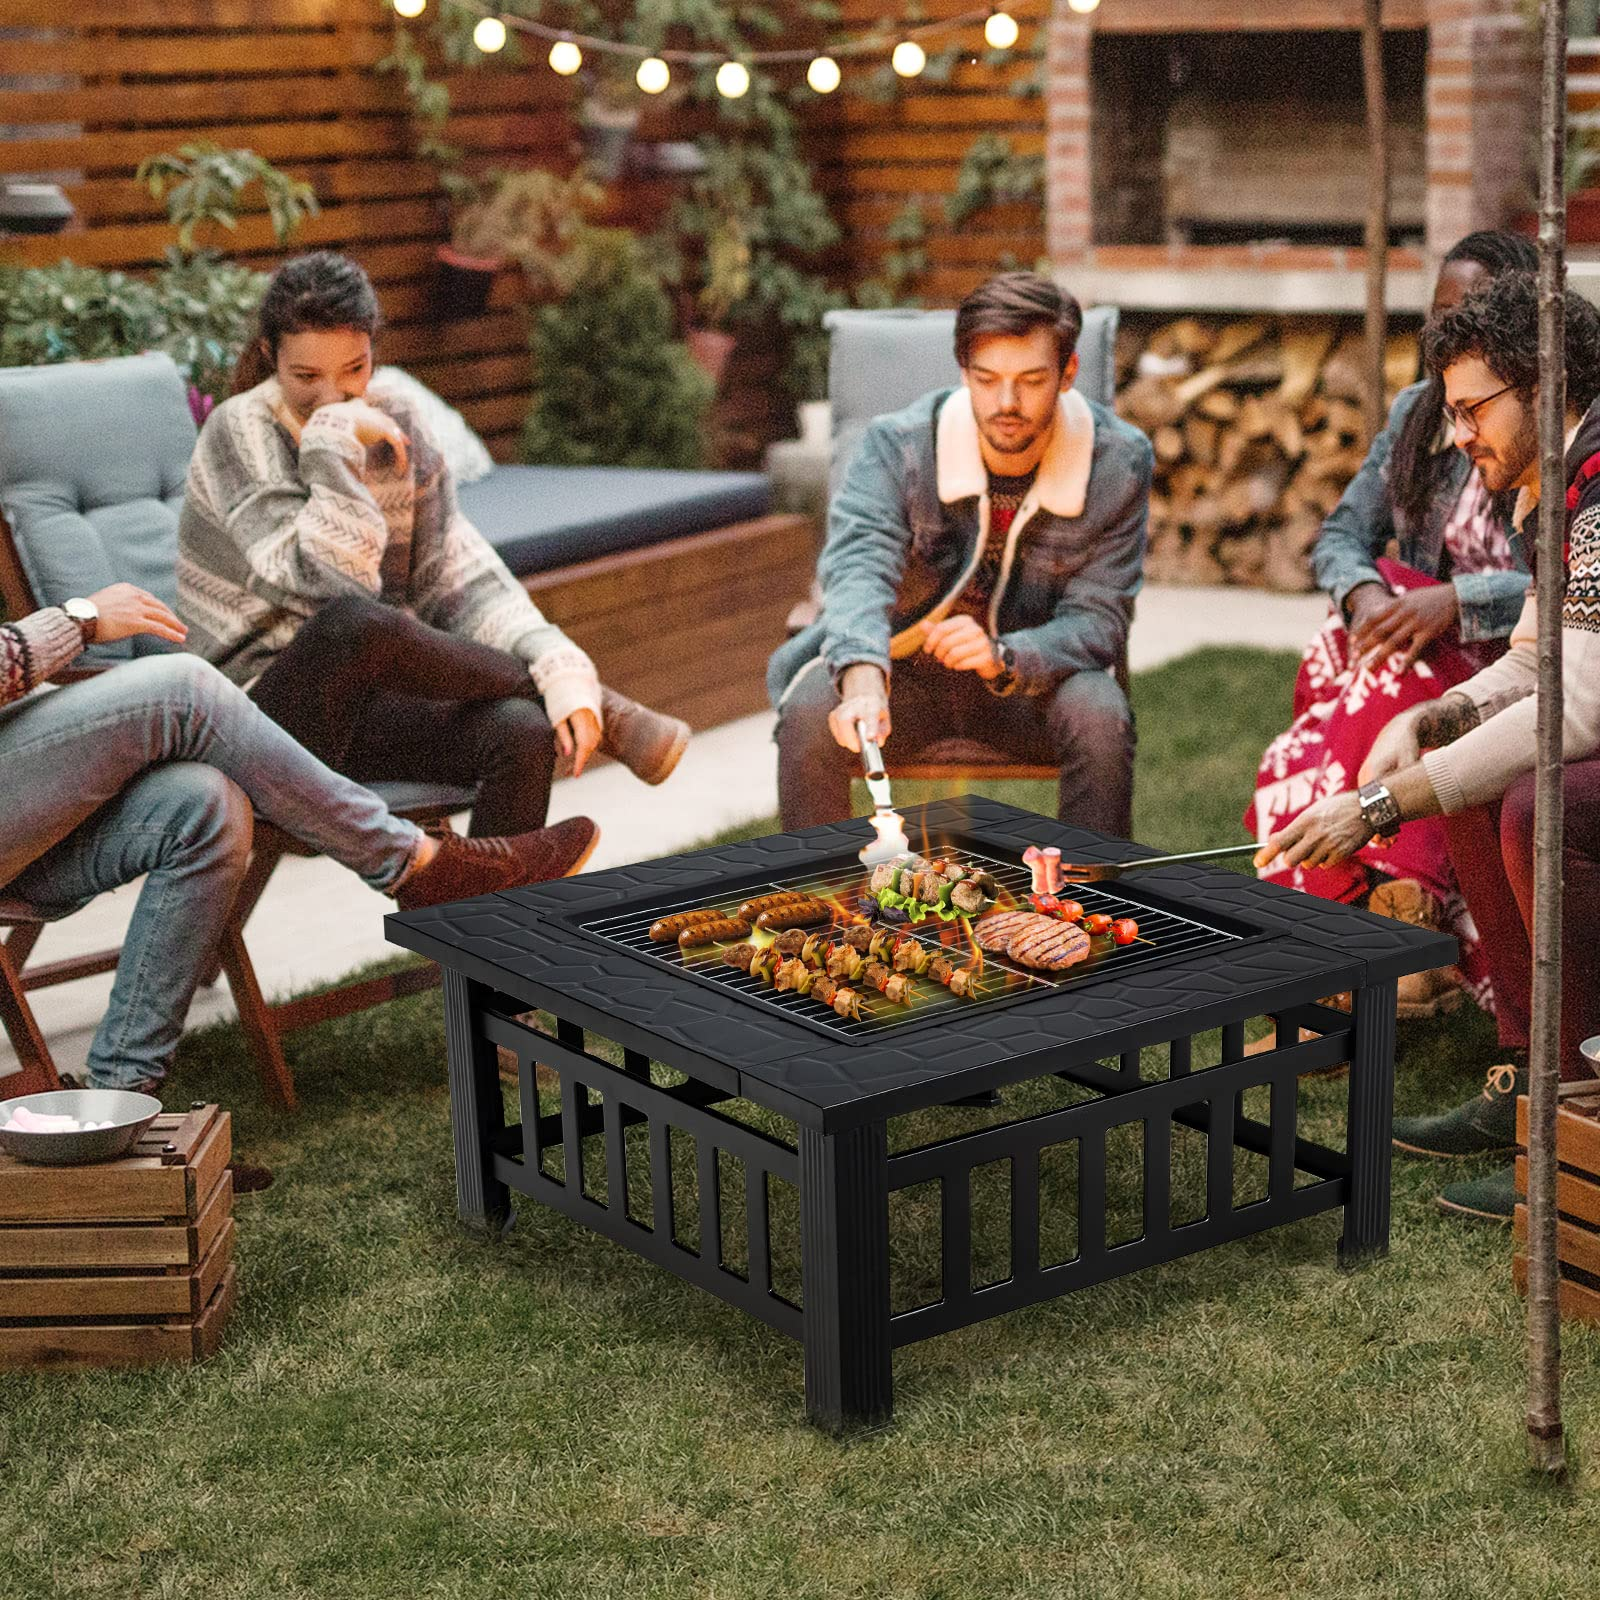 32" Outdoor Fire Pits, 3 in 1 Square Wood Burning Firepit